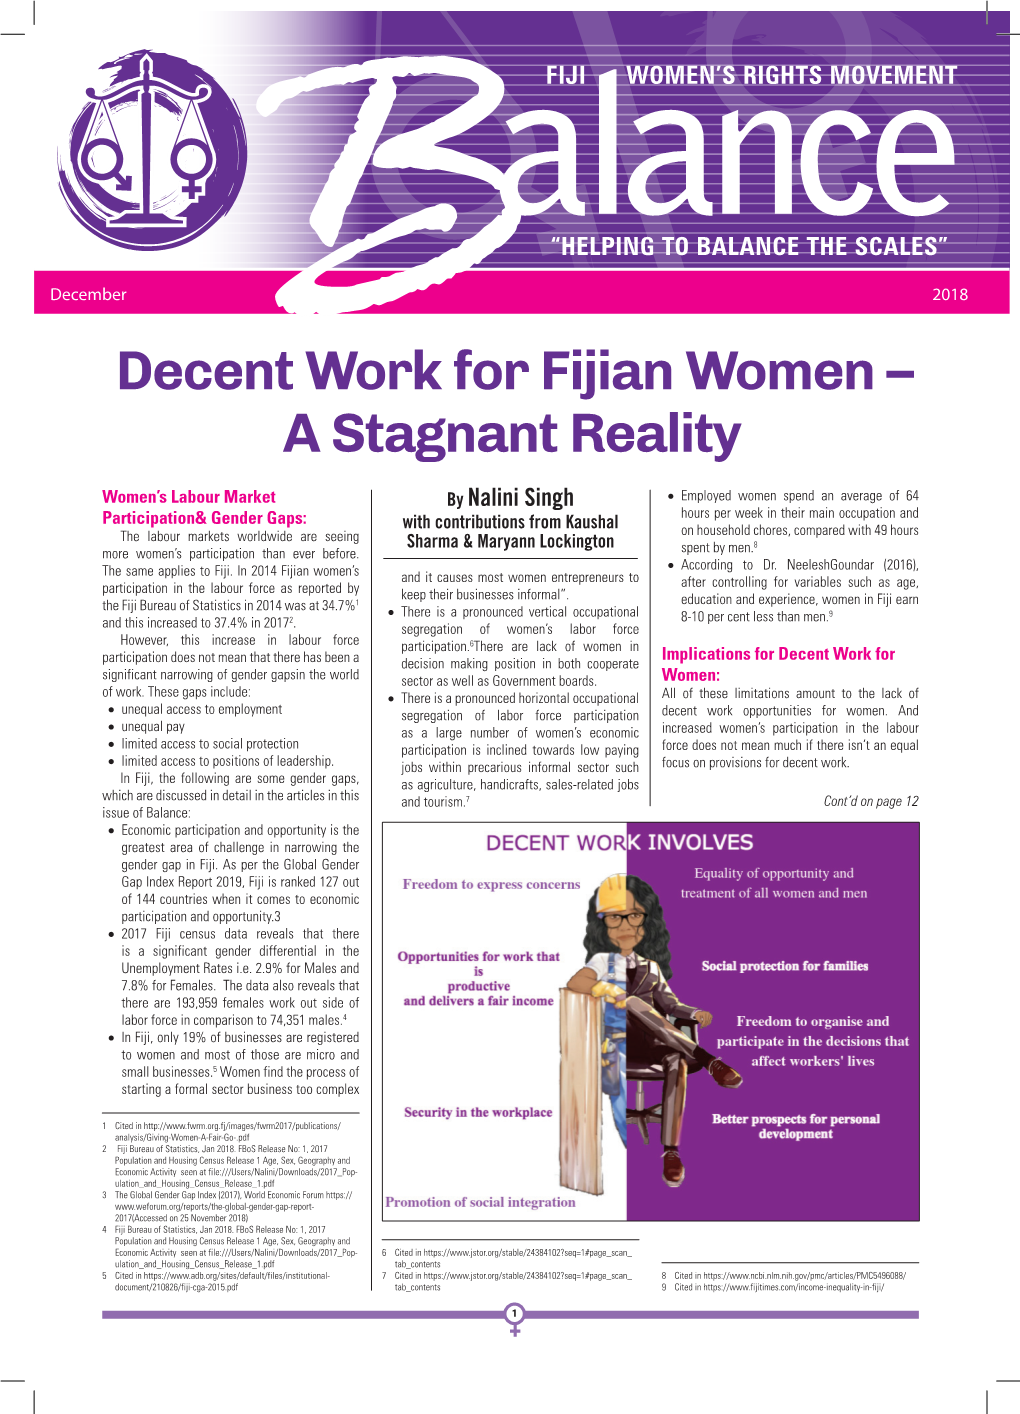 Decent Work for Fijian Women – a Stagnant Reality